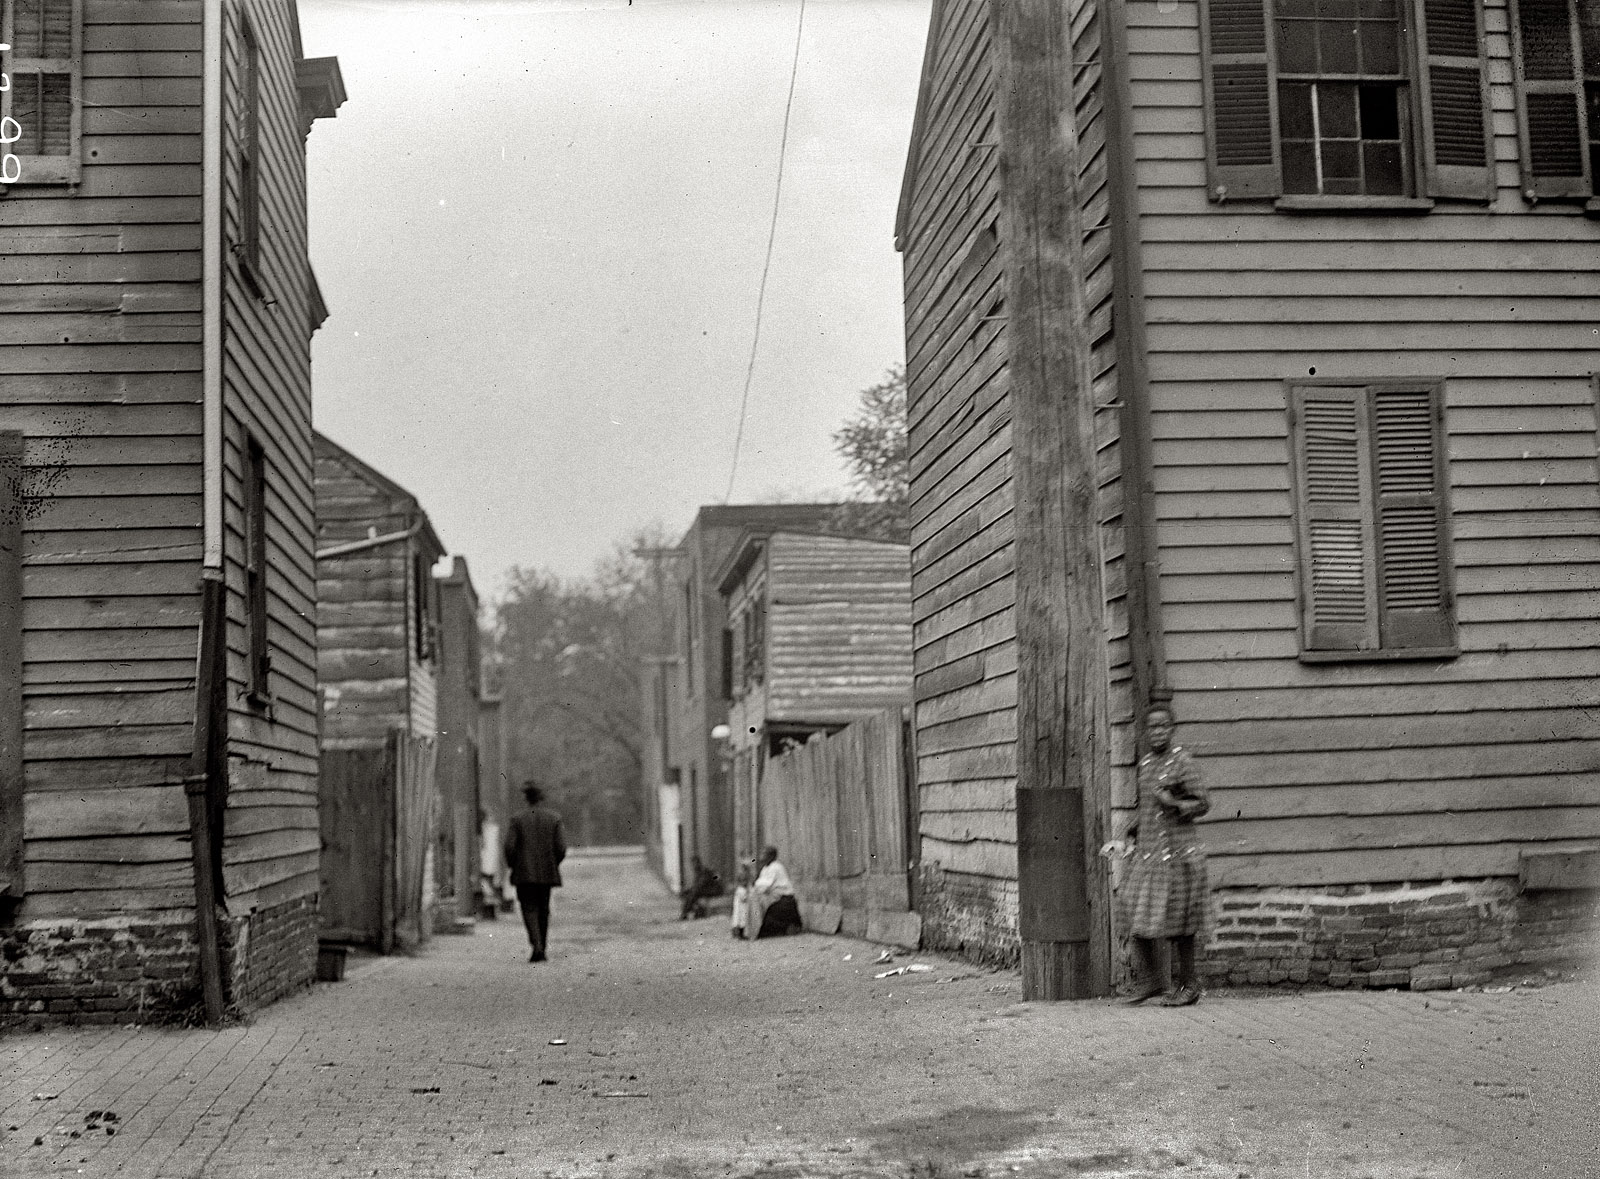 1914. "Alley clearance, slum views." Vestiges of the 19th century in a Washington, D.C., alleyway. Harris & Ewing Collection glass negative. View full size.